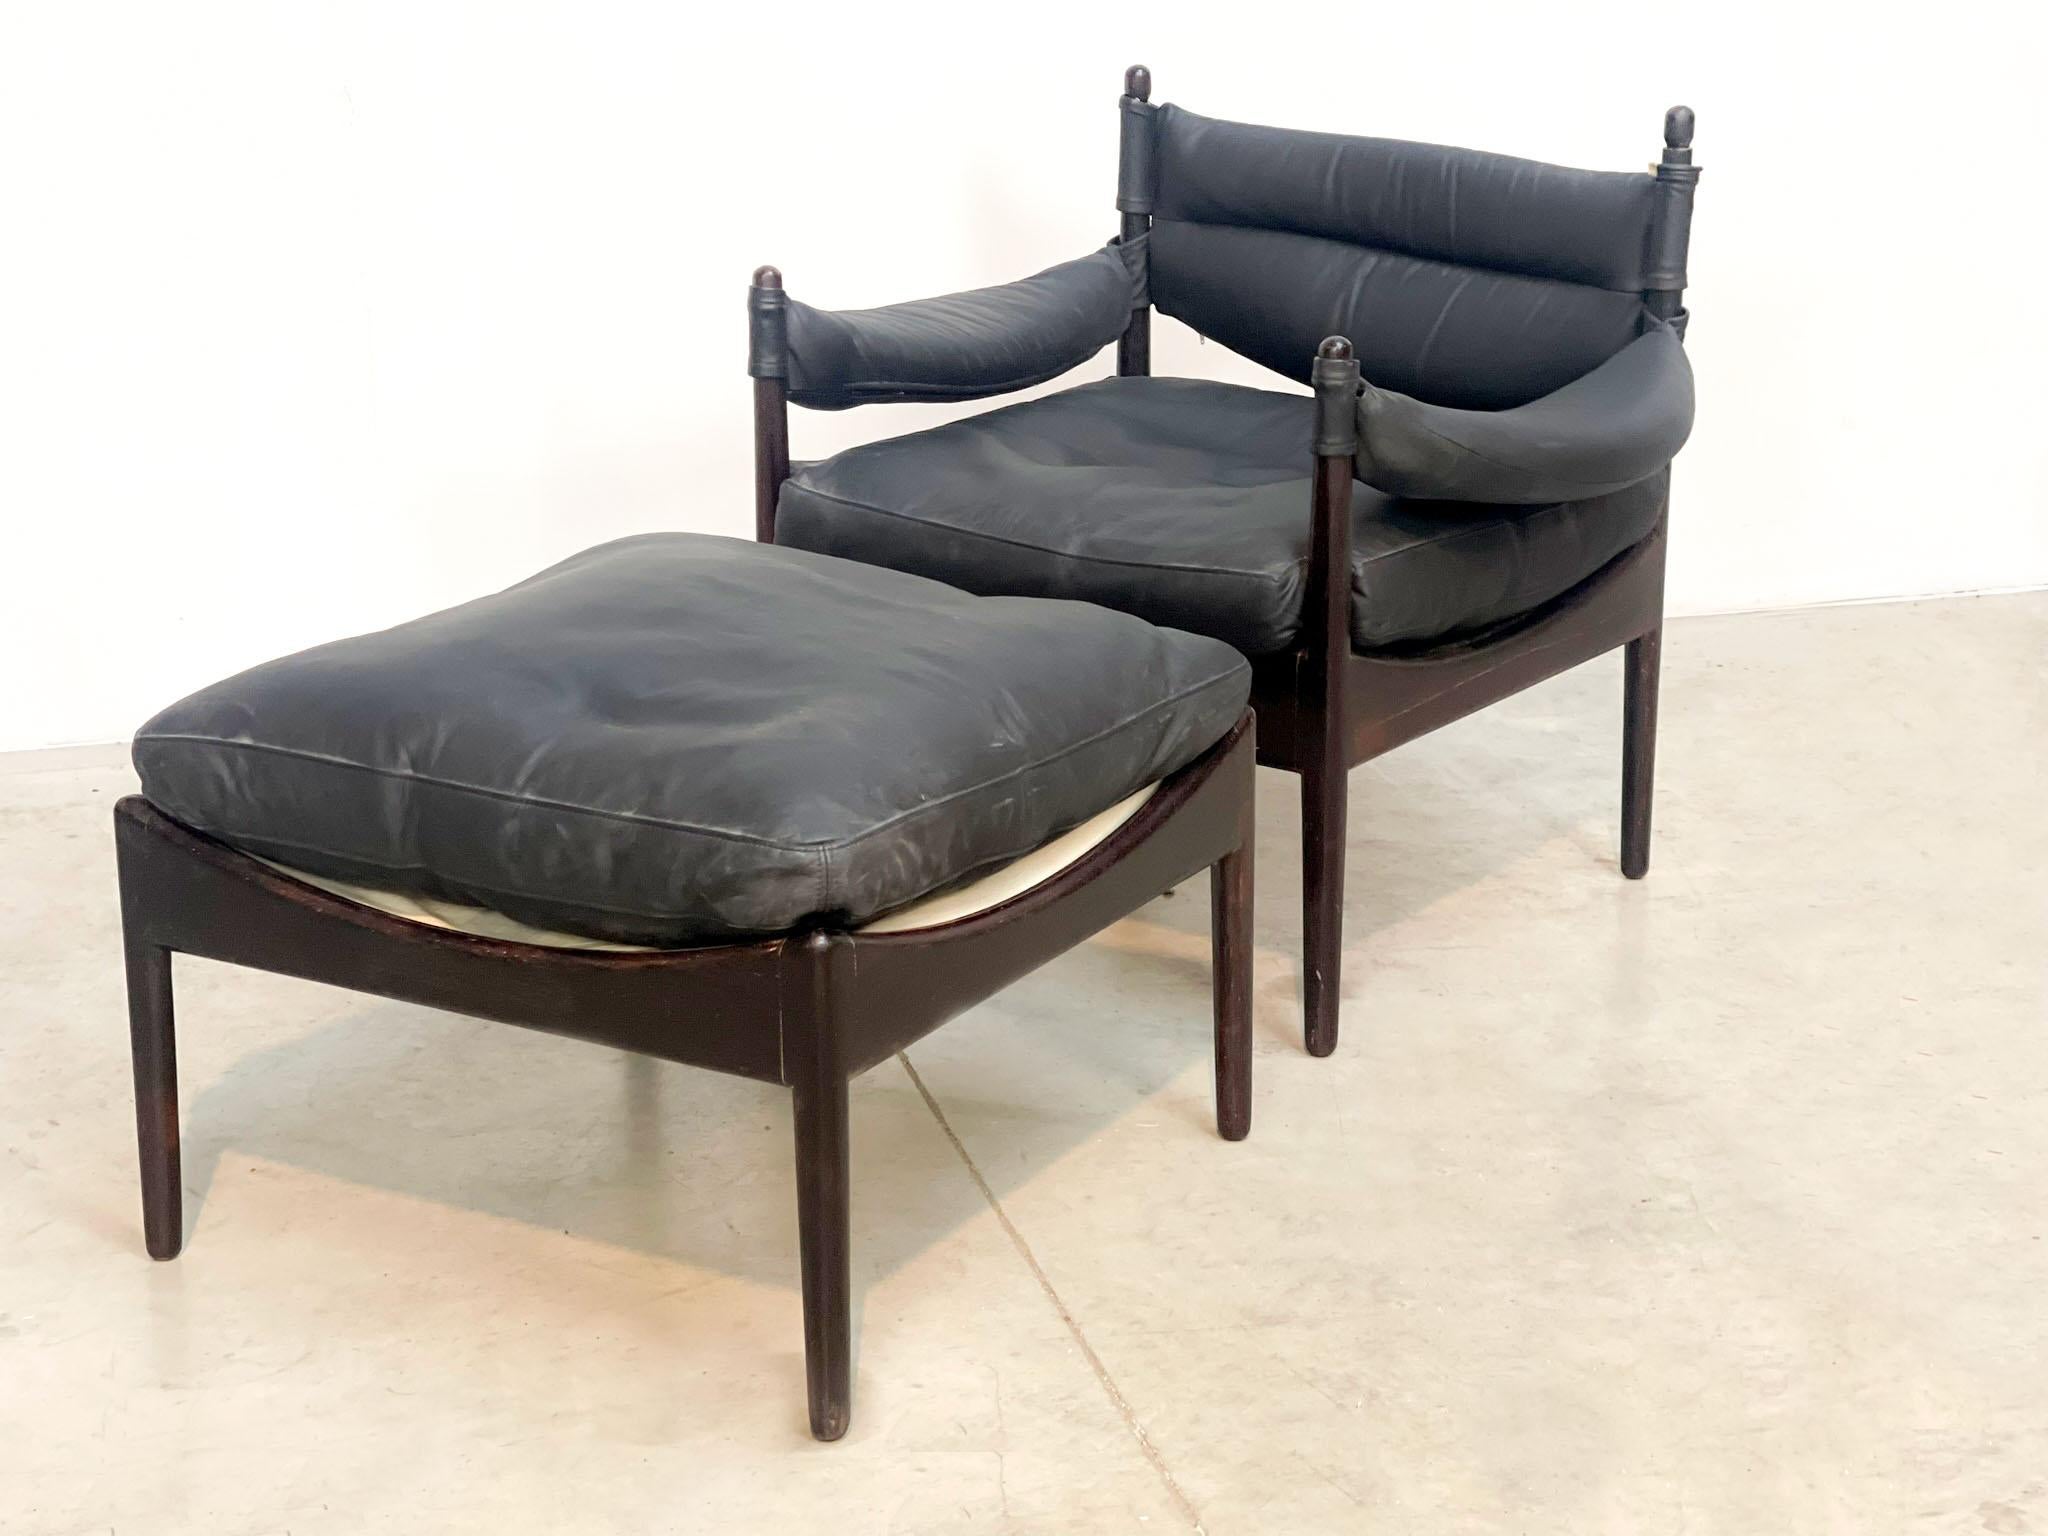 Nice Danish lounge chair by Danish designer Kristian Vedel. Kristian Vedel designed this chair in the 1960s for the 'Modus' collection, produced by Søren Willadsen in Denmark. 

There are several versions of it. This is a sought-after rosewood